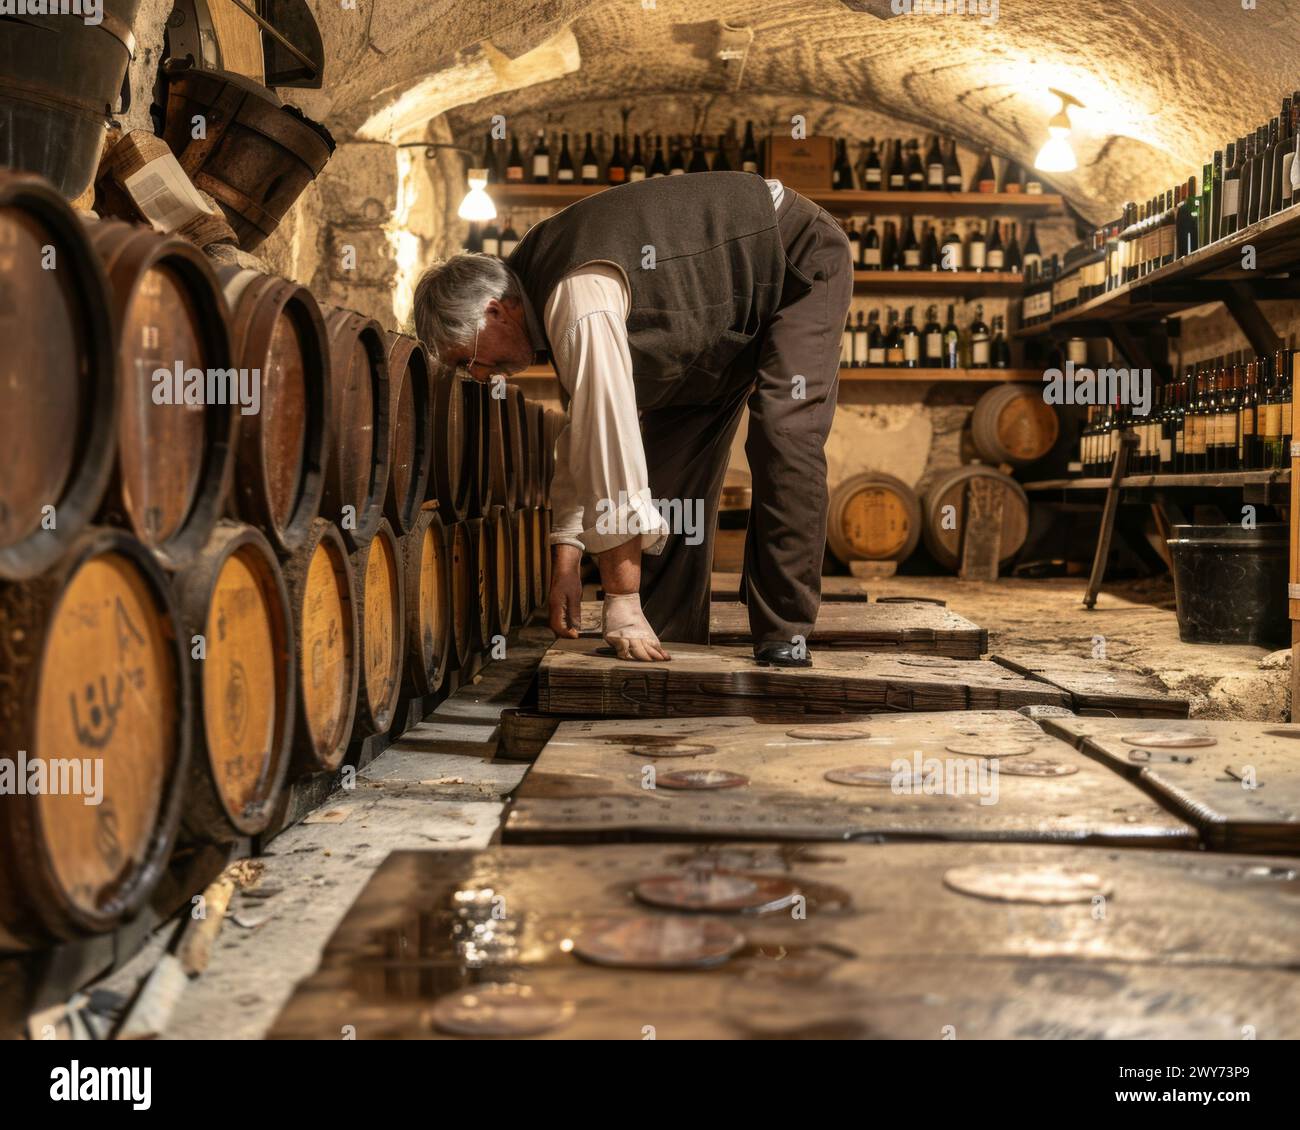 A man stooping down in a wine cellar surrounded by wine bottles. Stock Photo